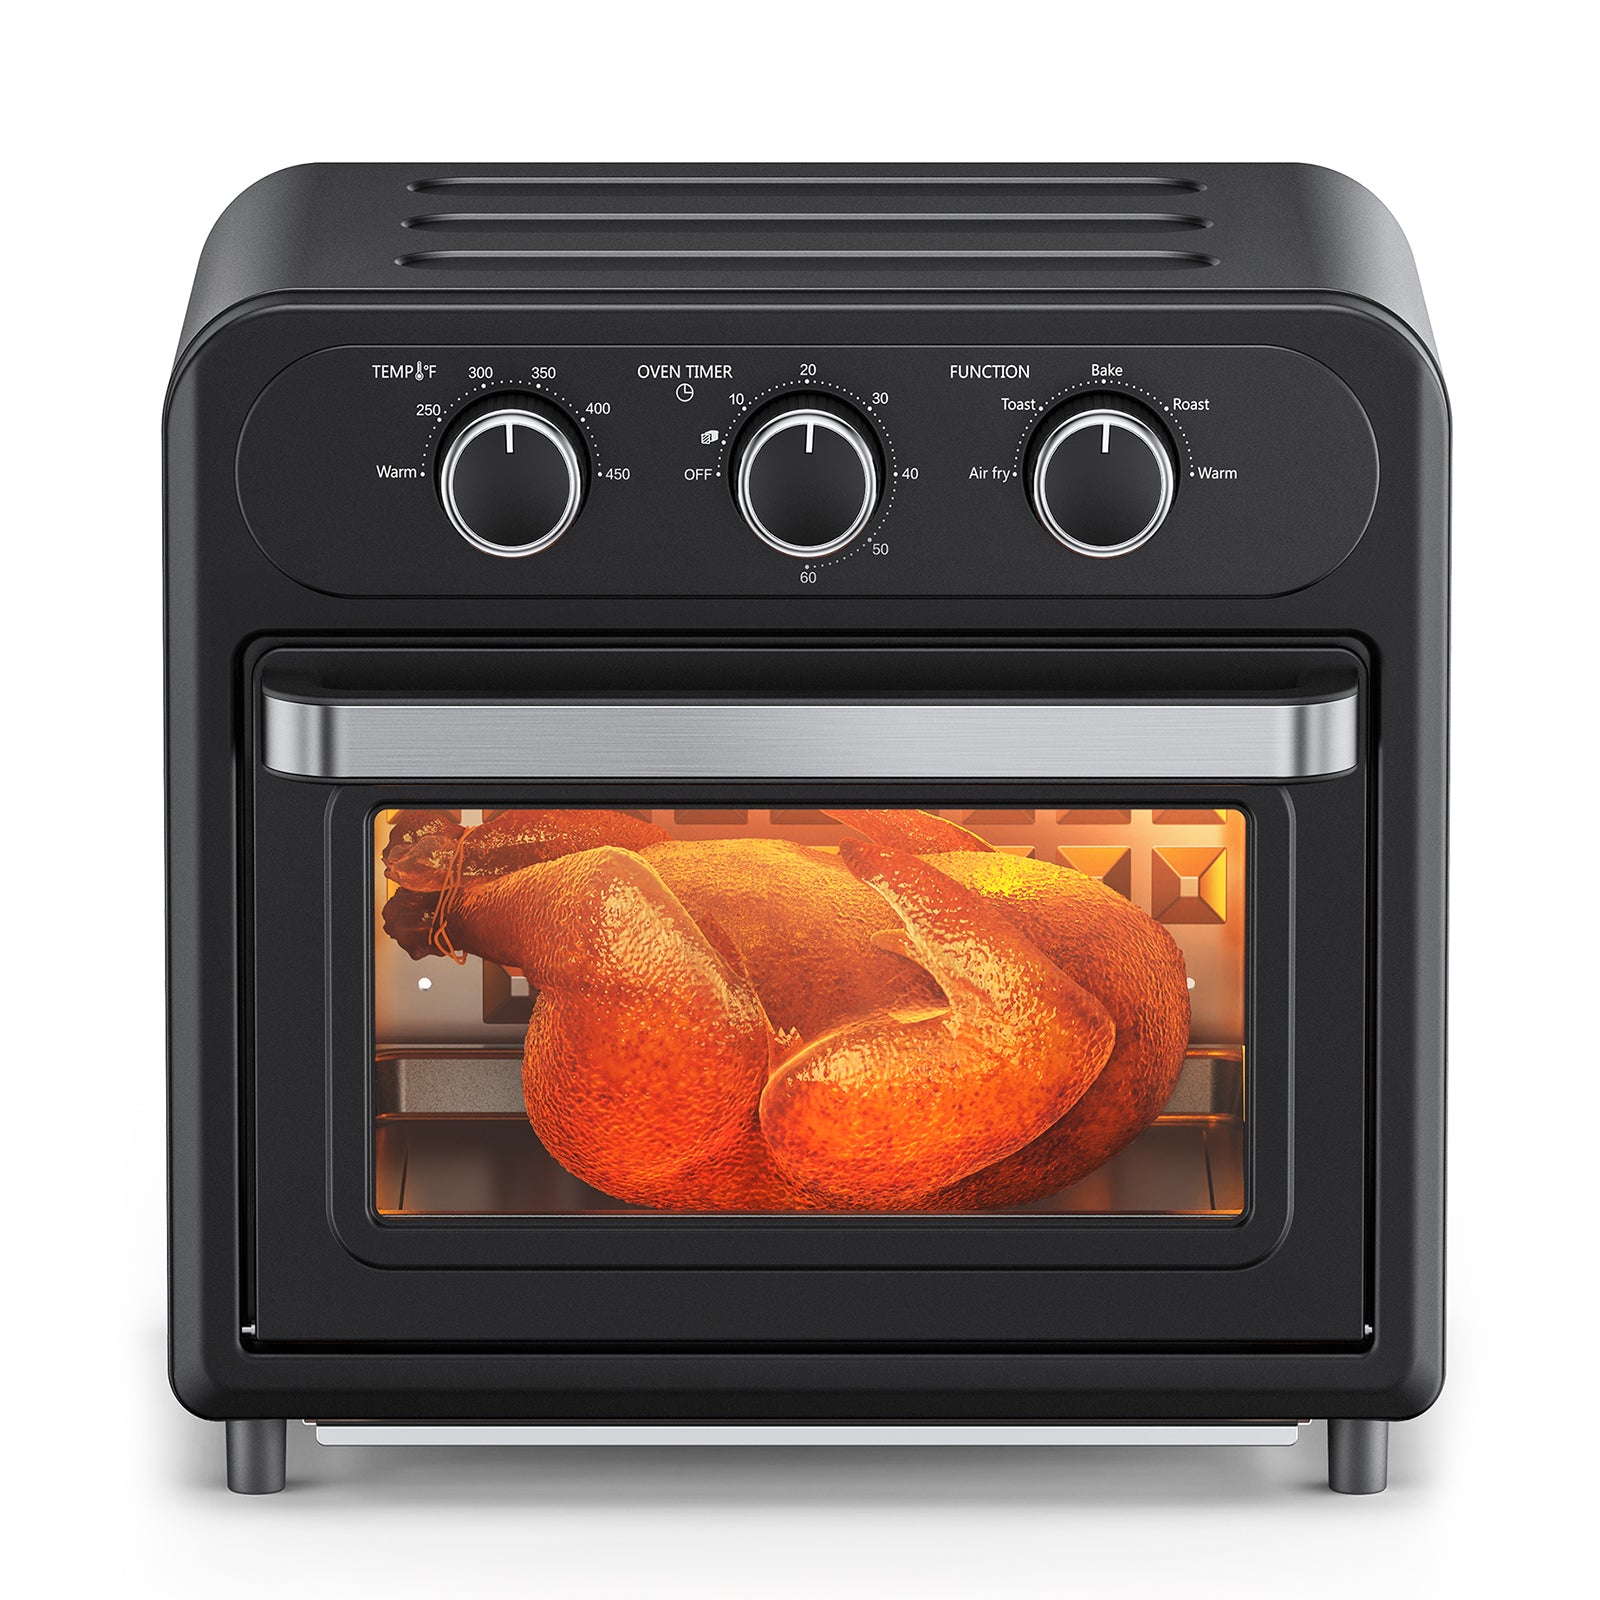 TaoTronics Air Fryer | 1700W 14.8 QT | 9 in 1 Air Fryer Oven | Oil-less Cooker with Rotisserie Shaft, Beige